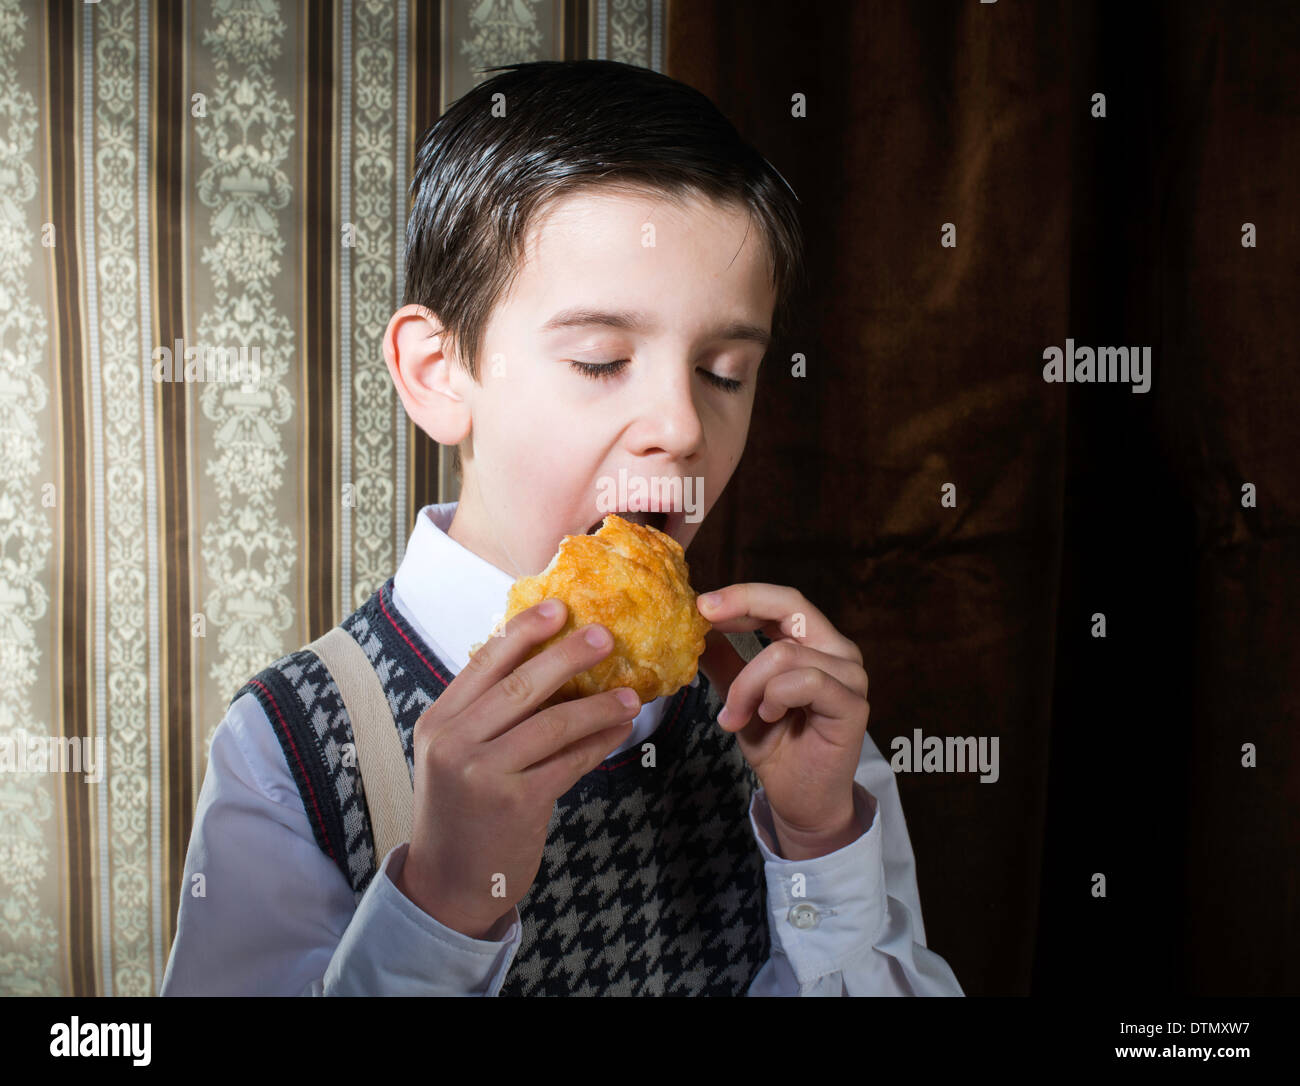 Child who eat donut. Vintage clothes and background Stock Photo